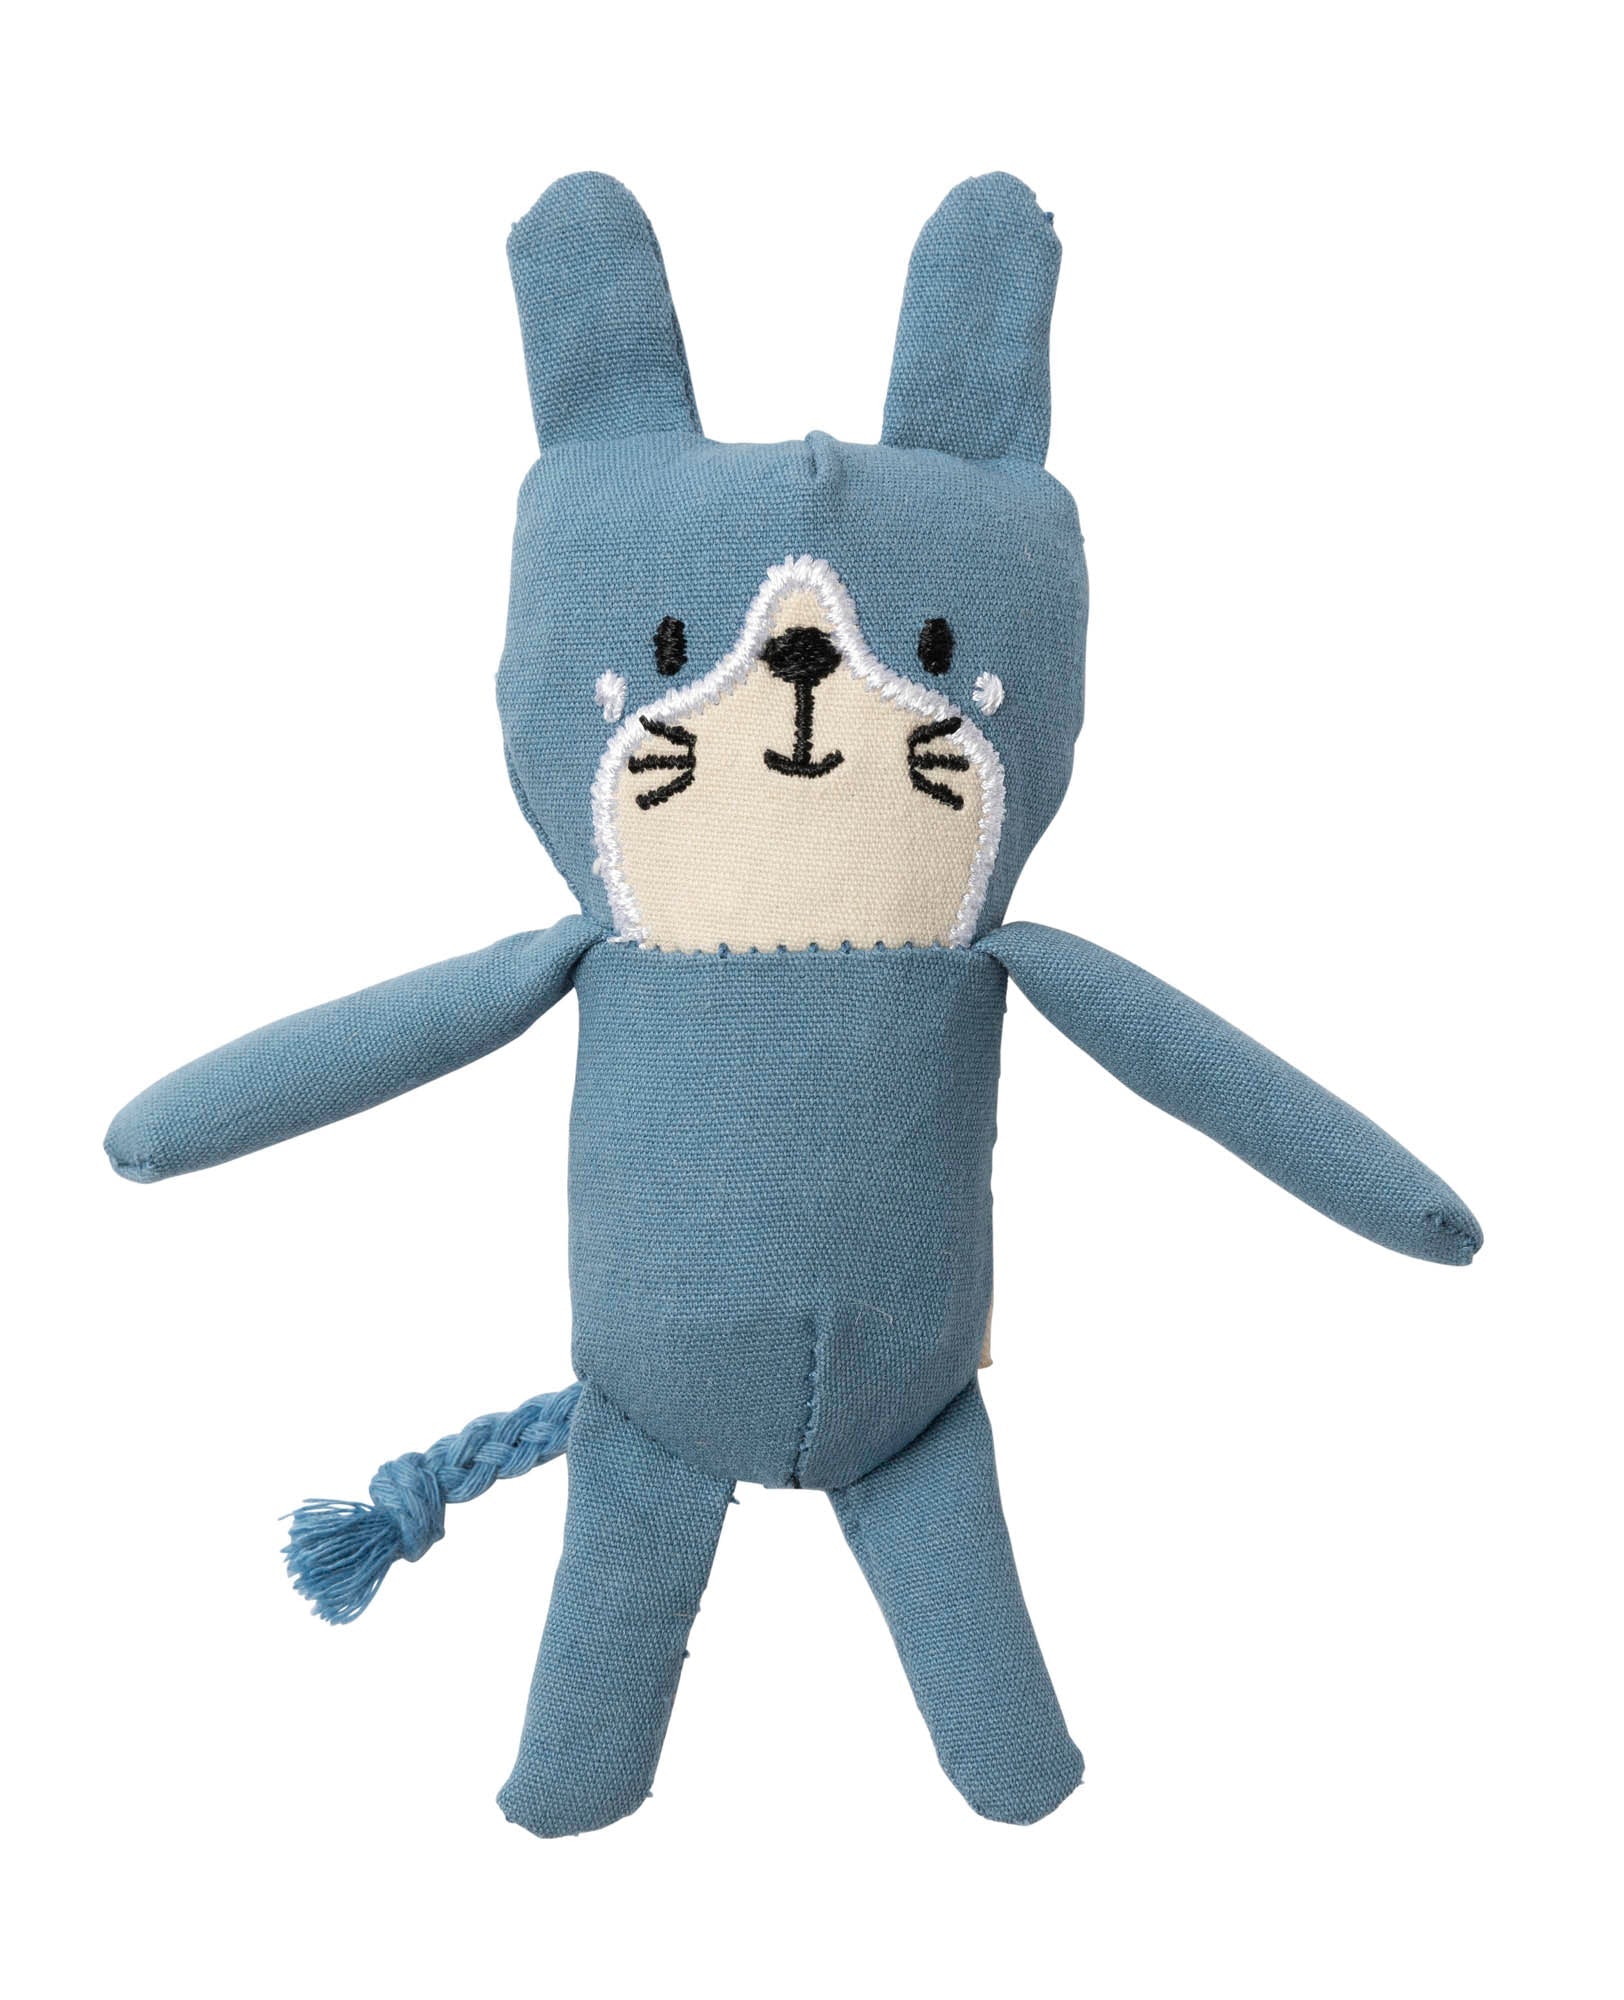 FZTC86_FYLife_CatToy_Cat_FrenchBlue_2000x